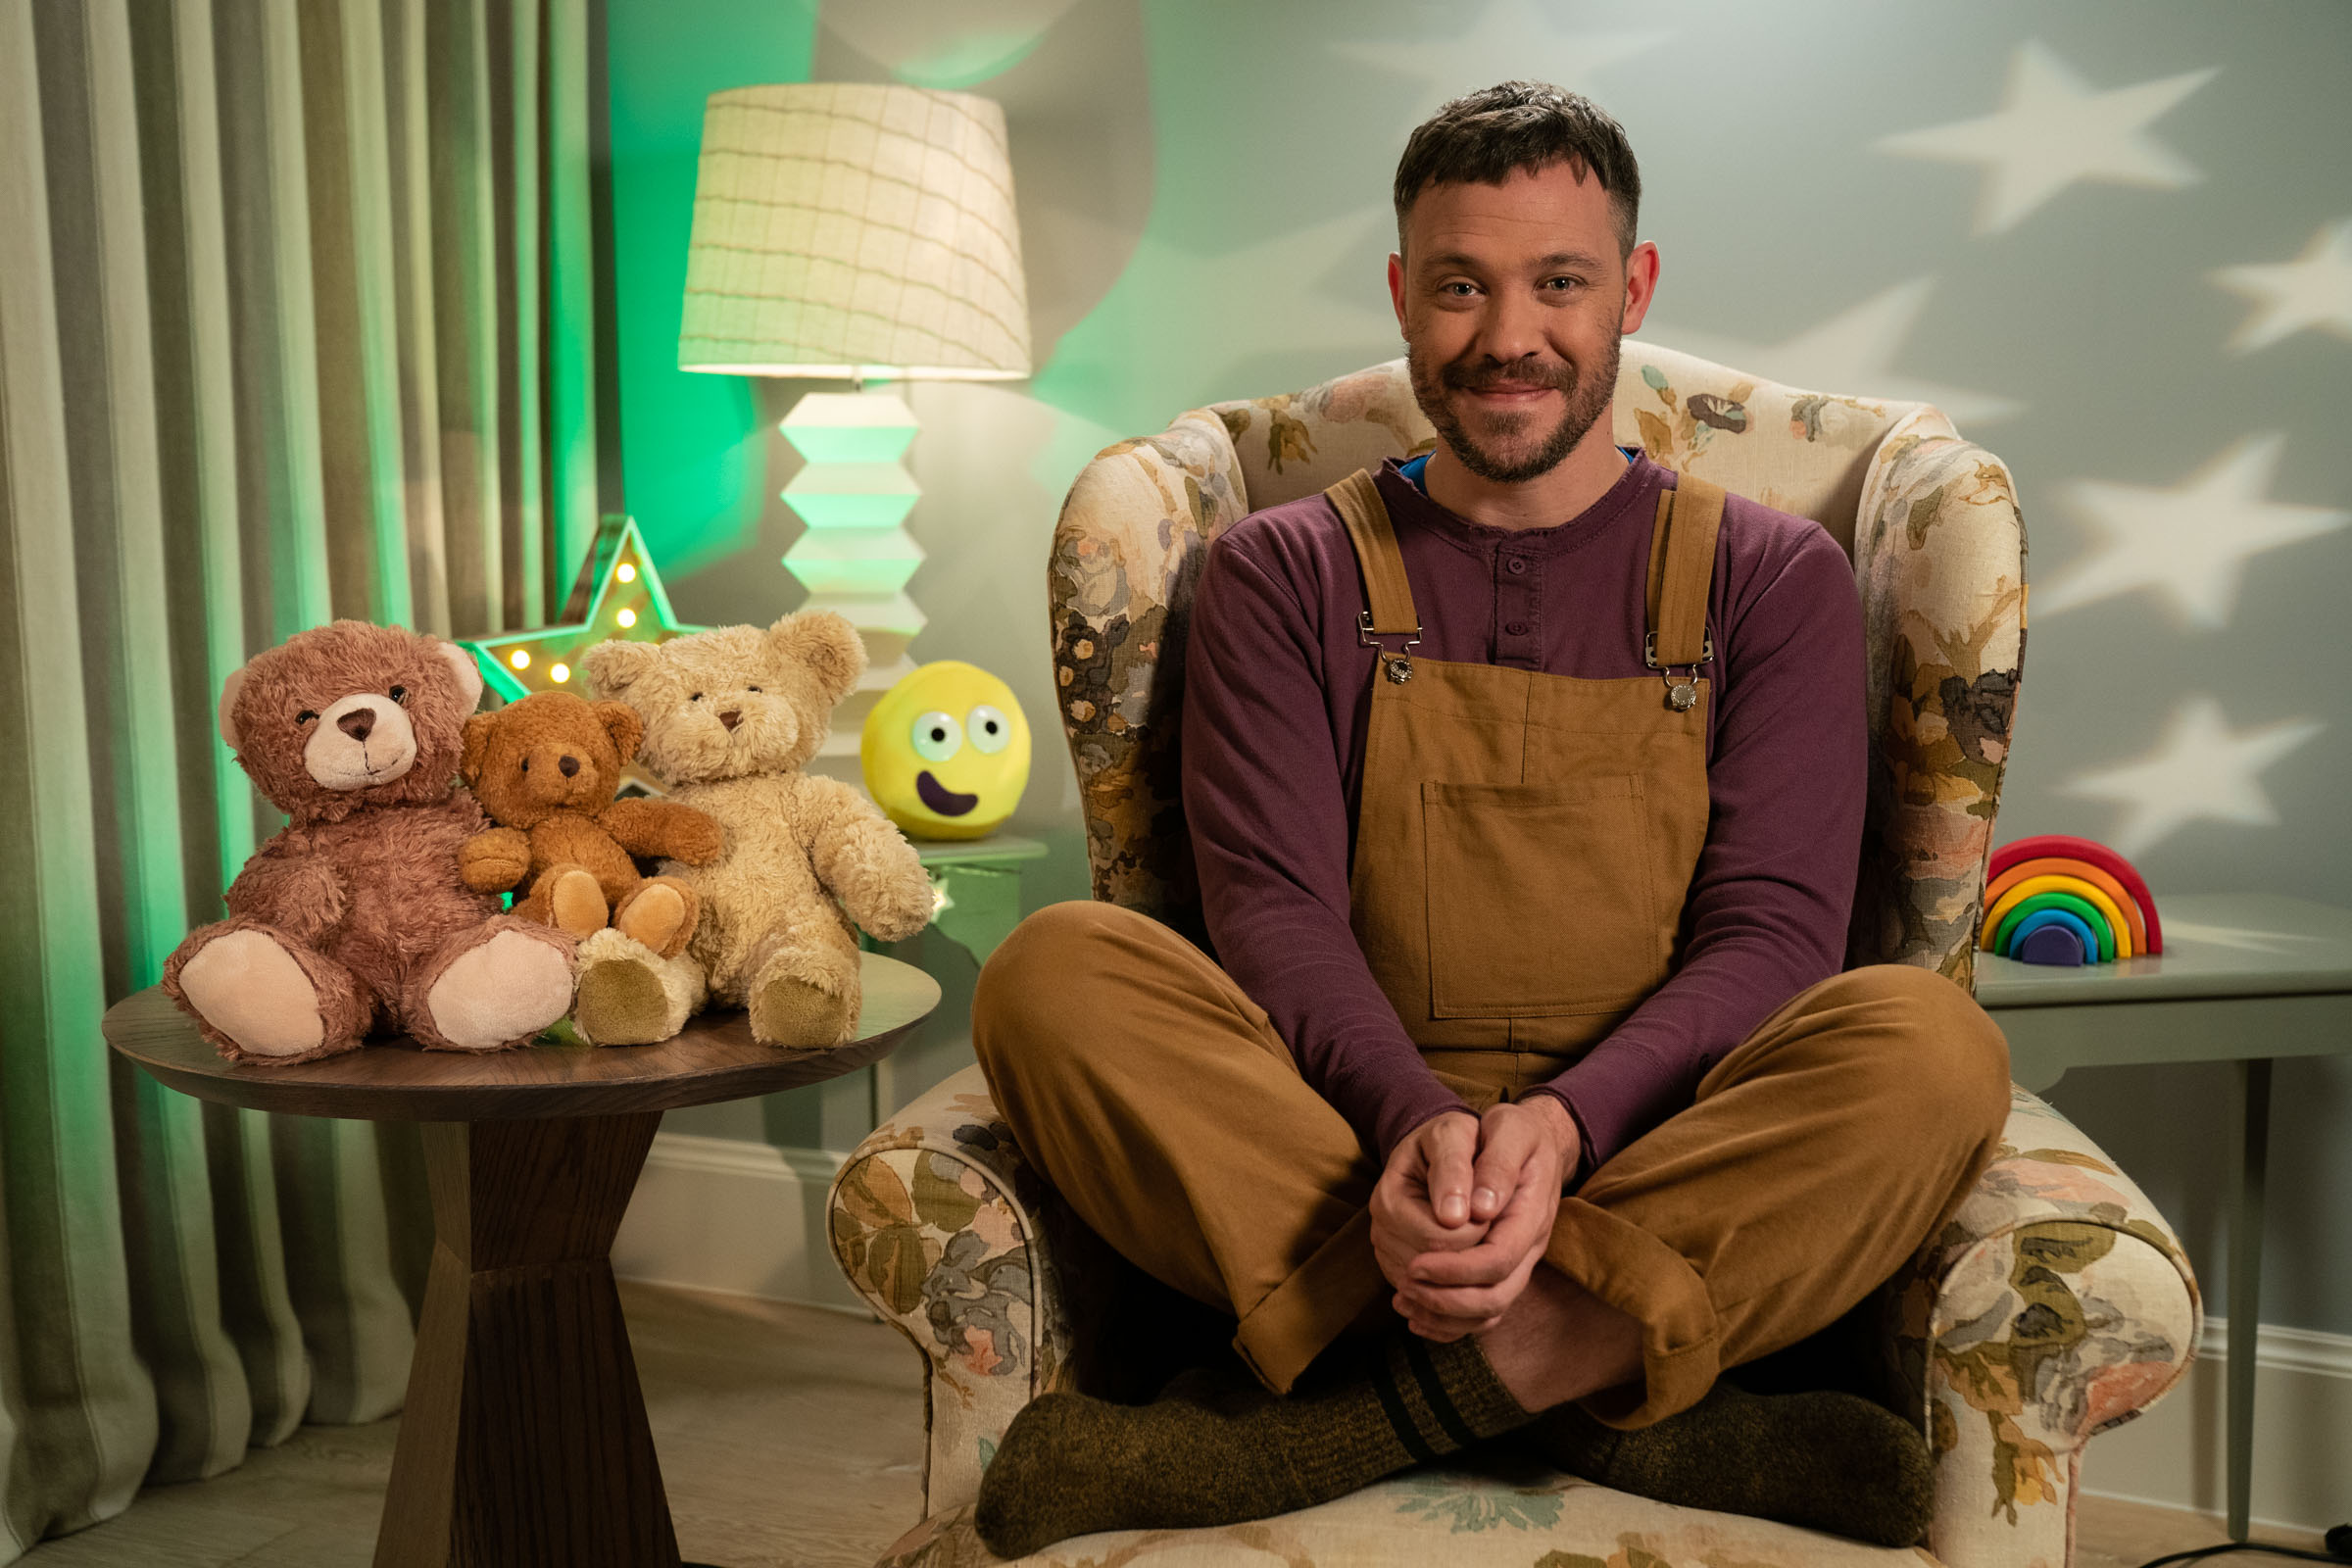  Will Young  CBeebies / BBC 